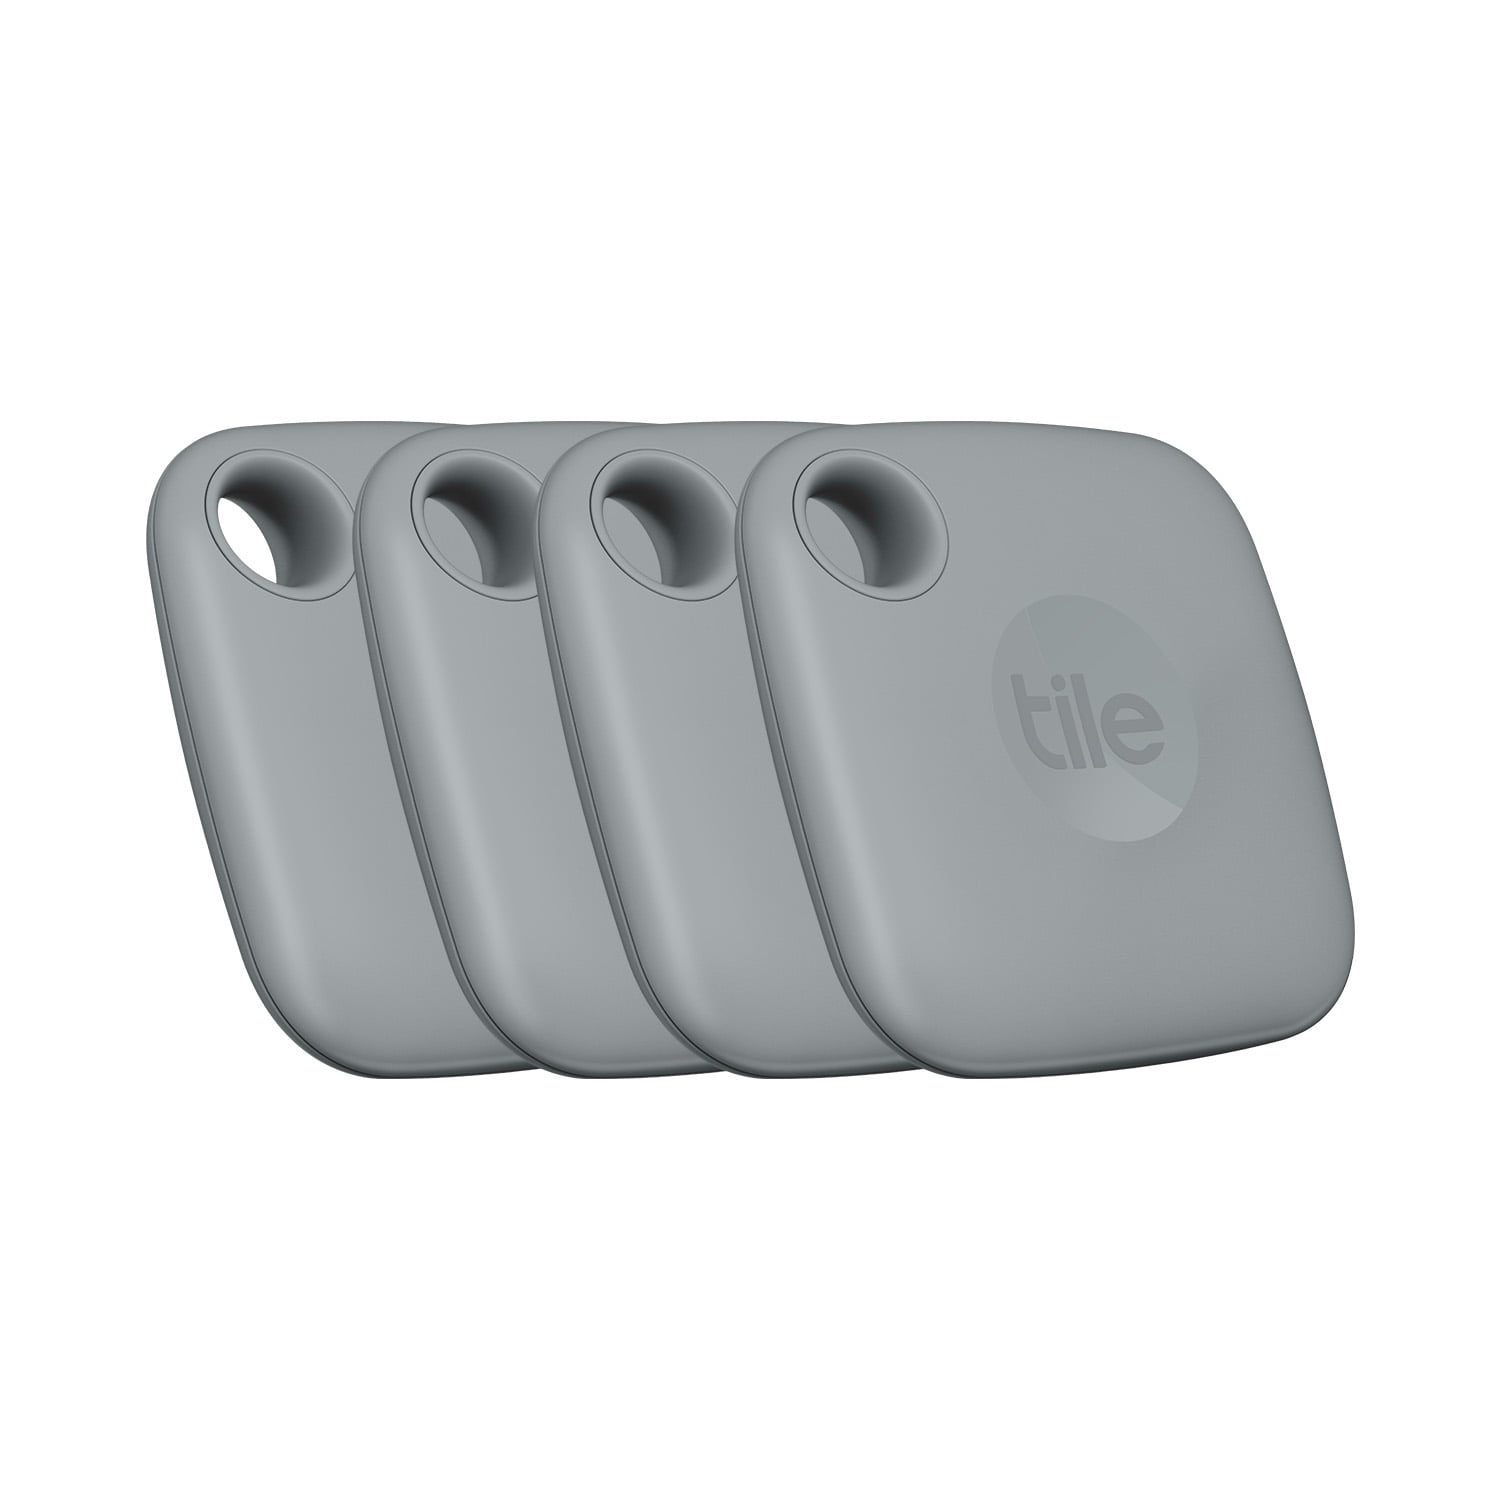 Tile mate vs Tile pro: Which is the best Bluetooth tracker for